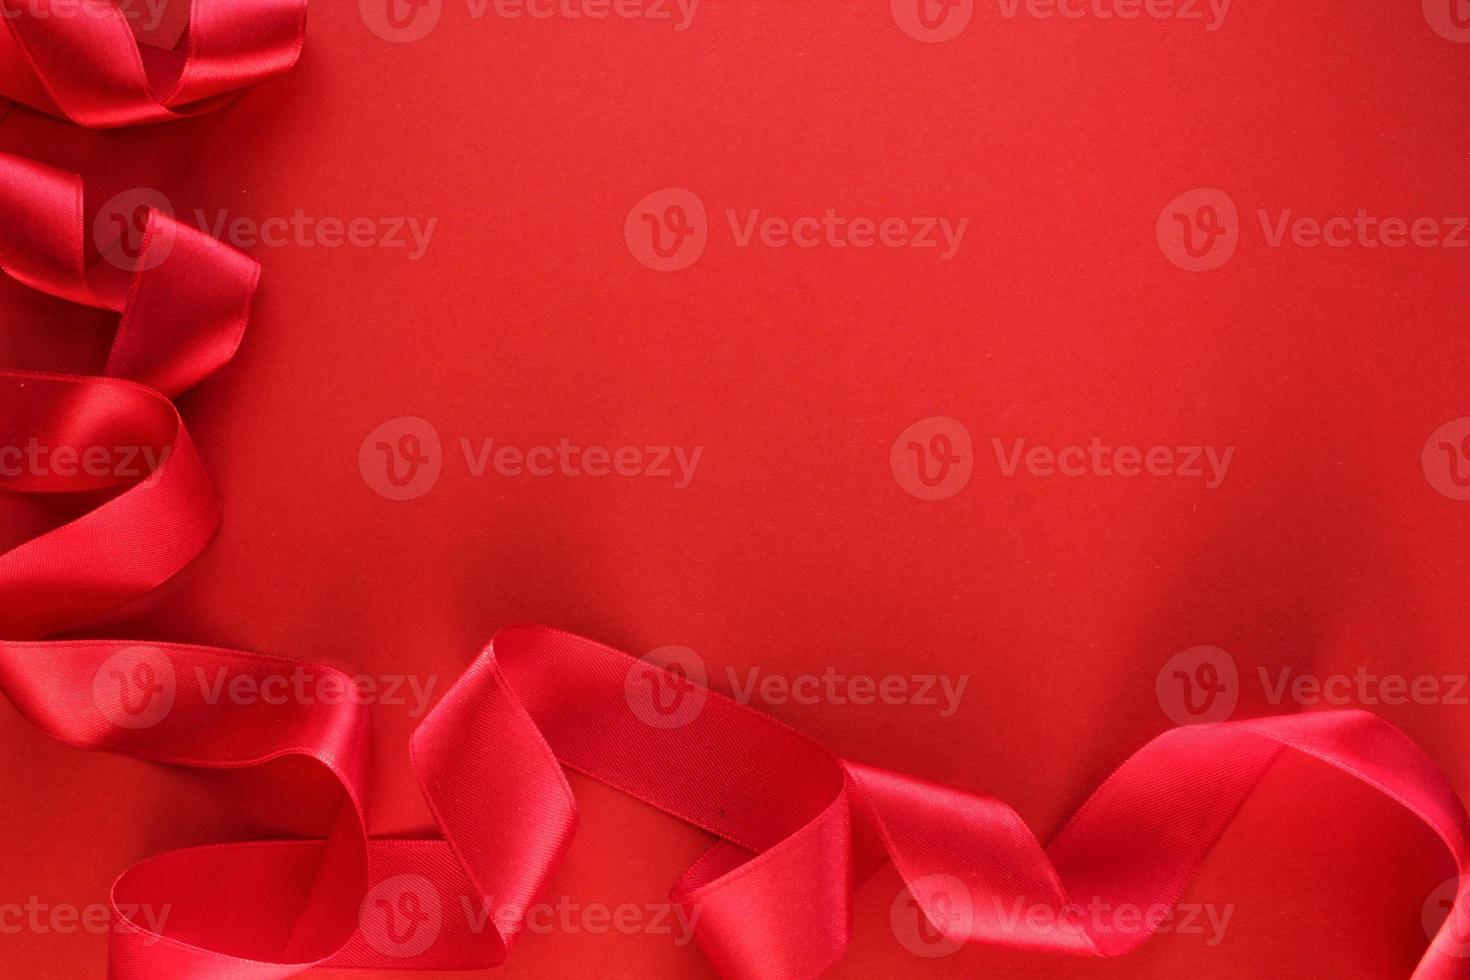 Curved wavy silk satin red ribbon on red background with copy space for text. Holiday, celebration, anniversary, birthday gift decoration concept. Idea for greeting card, sale banner photo